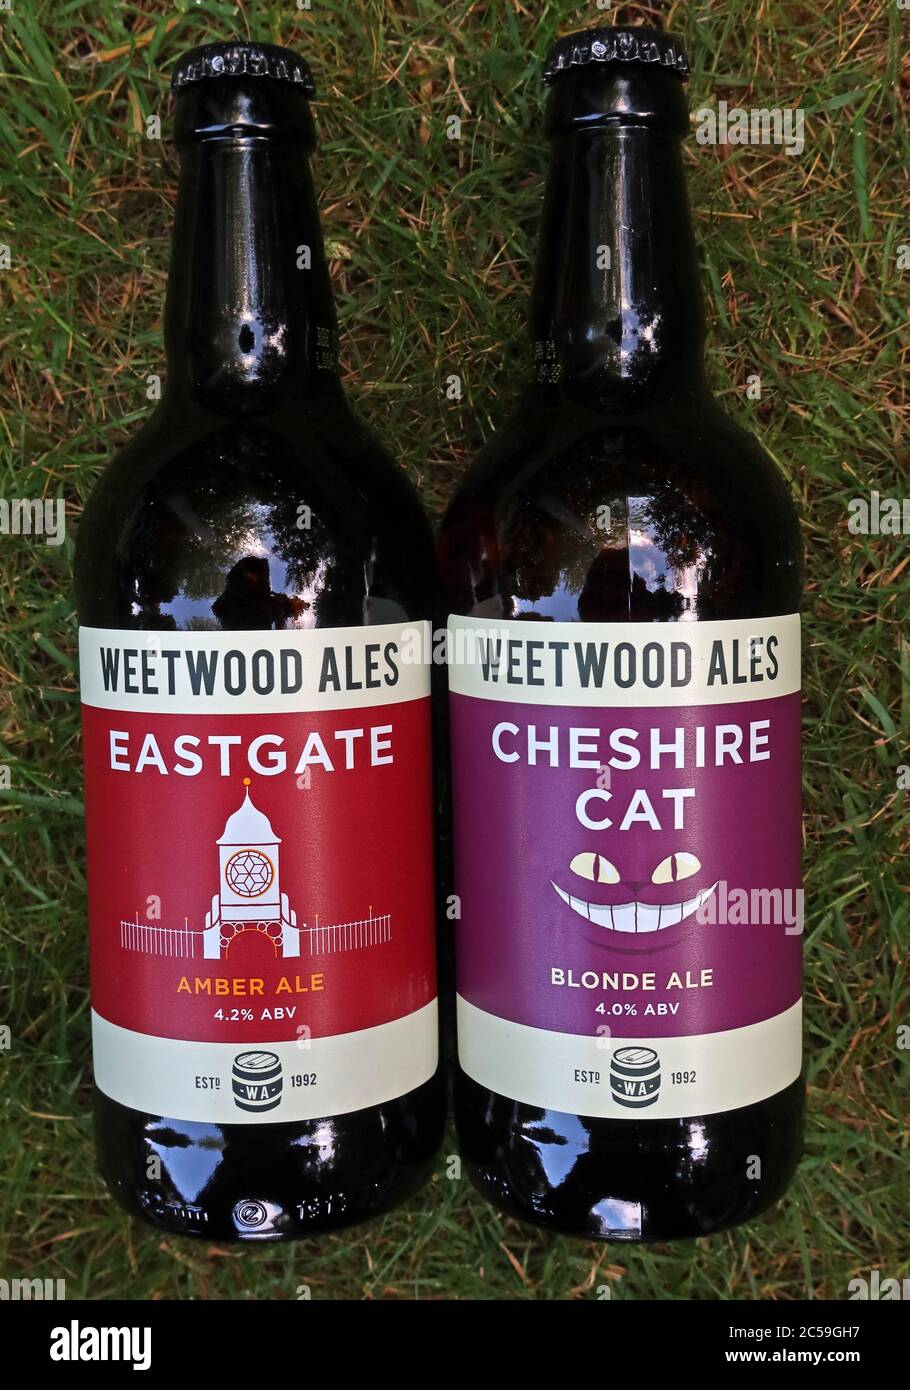 Weetwood bottled ales, award winning Cheshire brewery, Eastgate,Amber Ale,Cheshire Cat,Blonde Ale Stock Photo